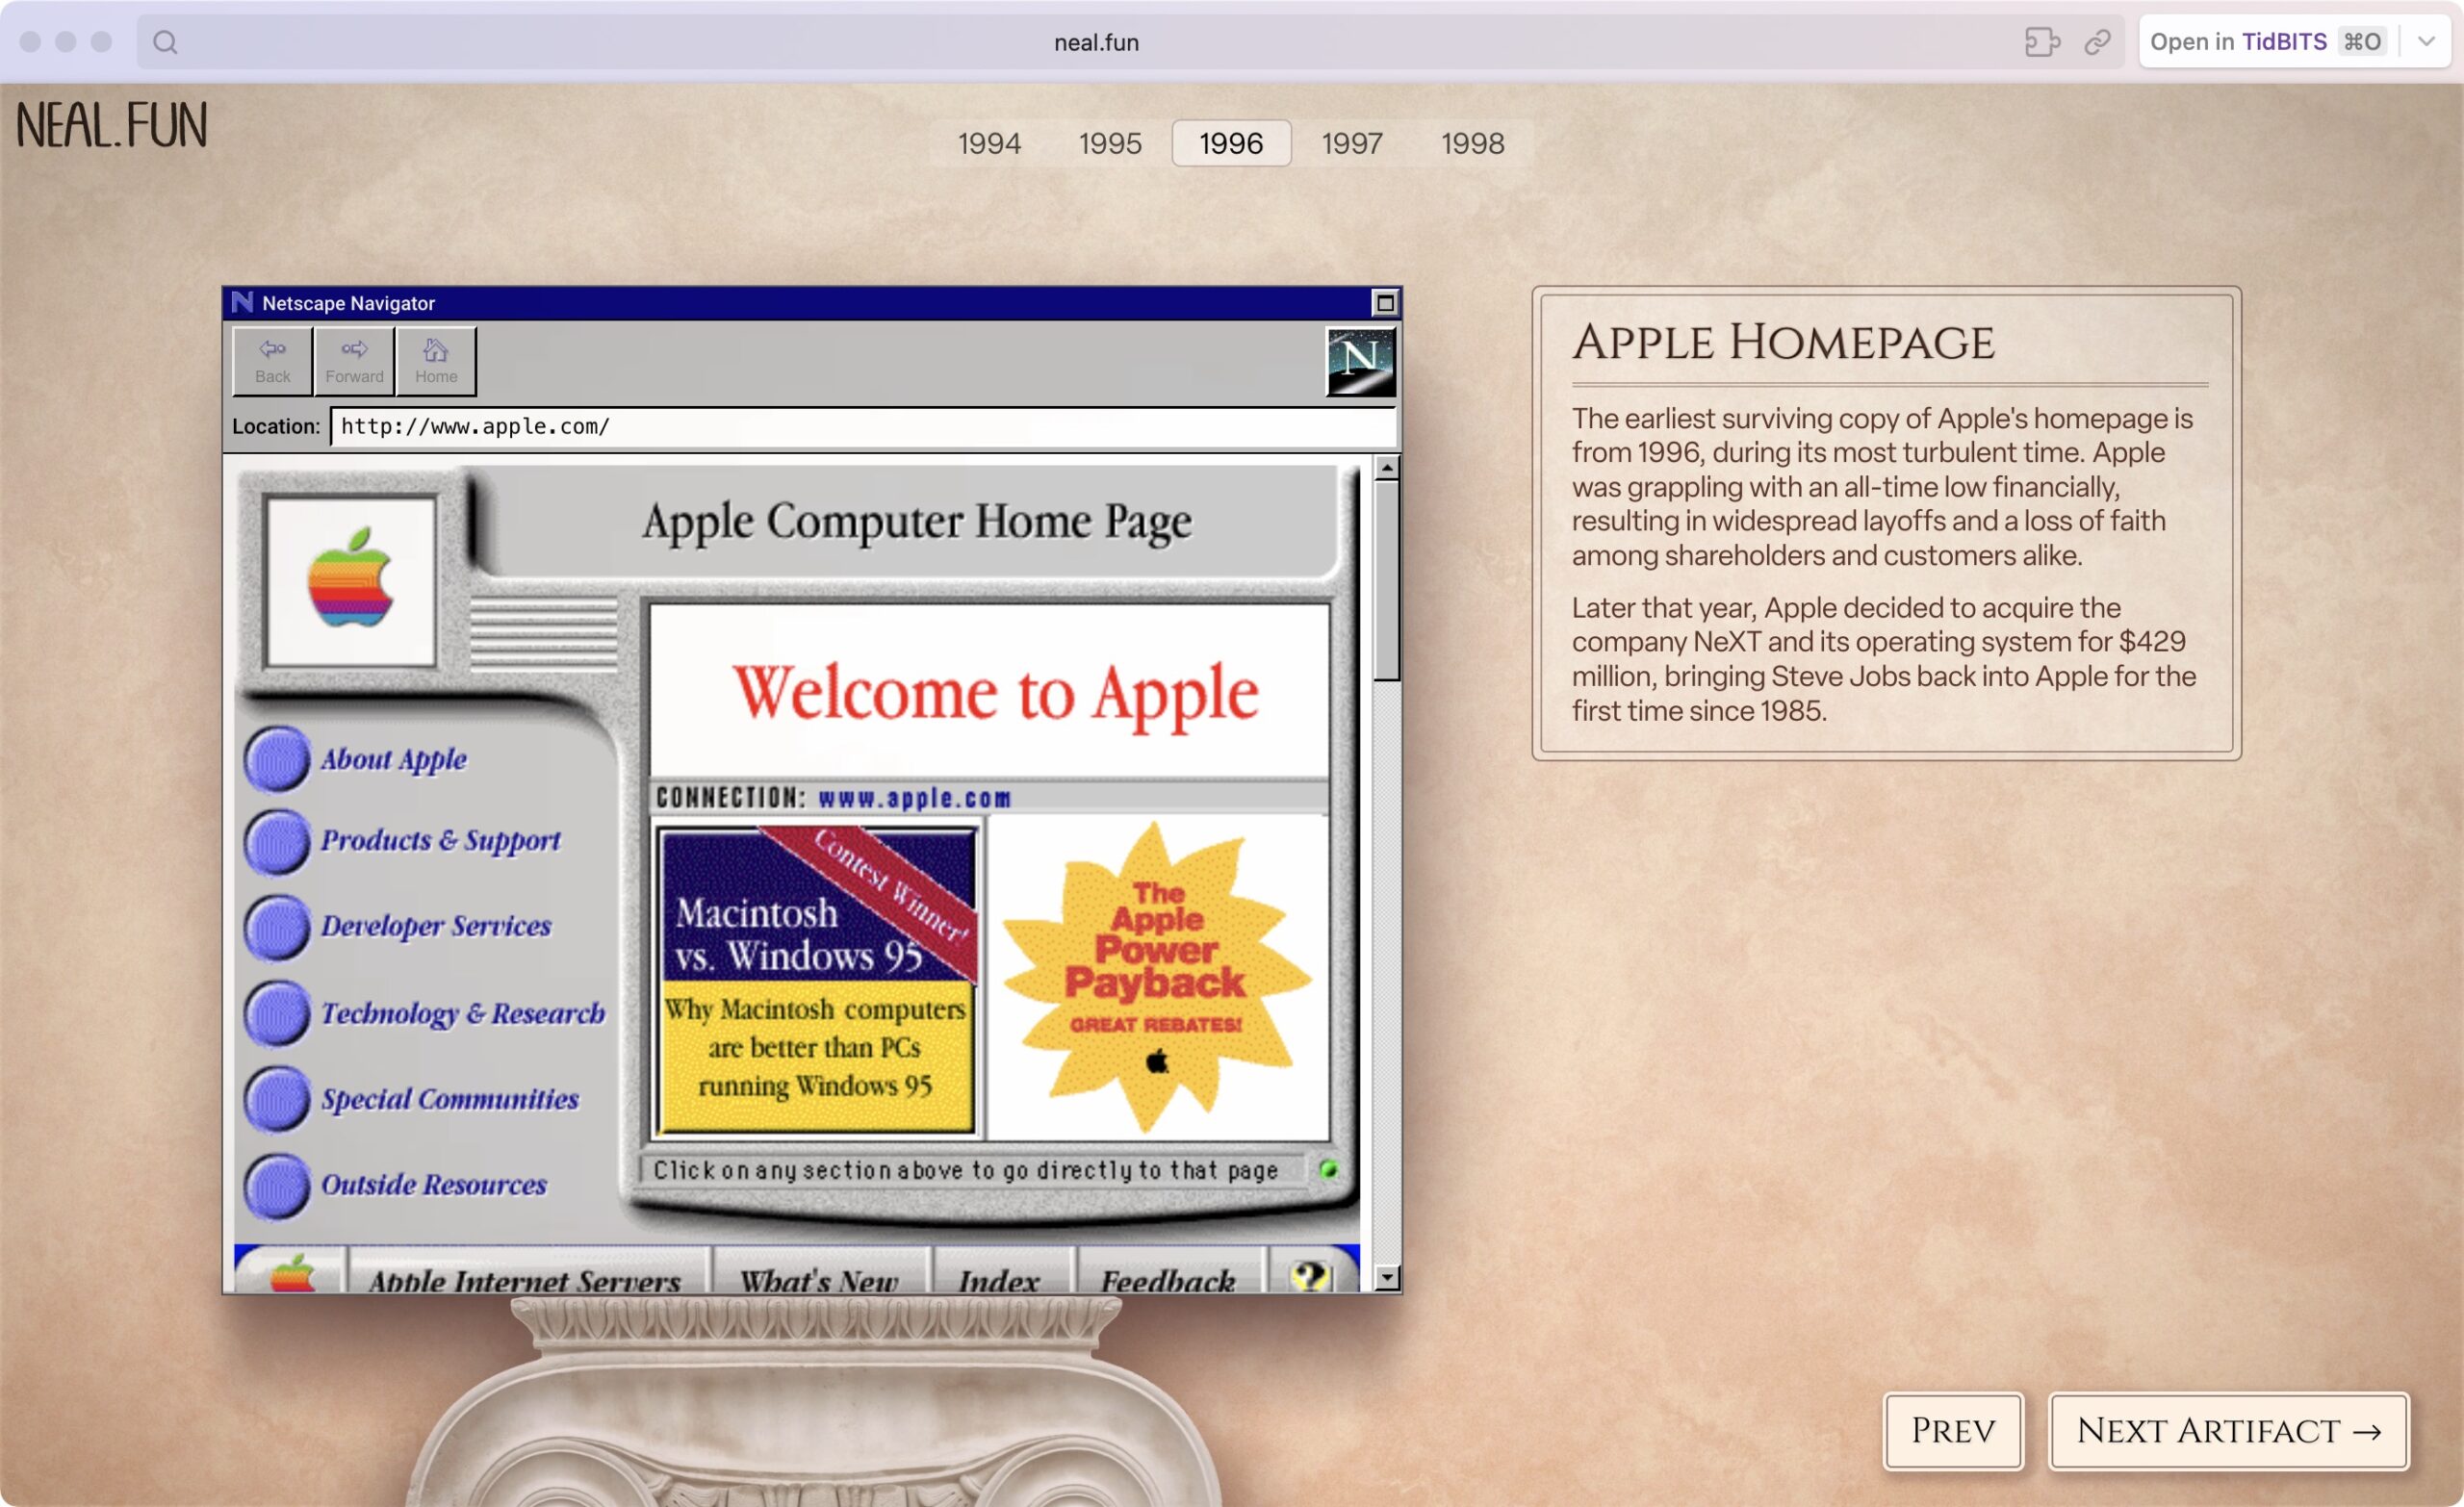 First Apple homepage in Internet Artifacts virtual museum